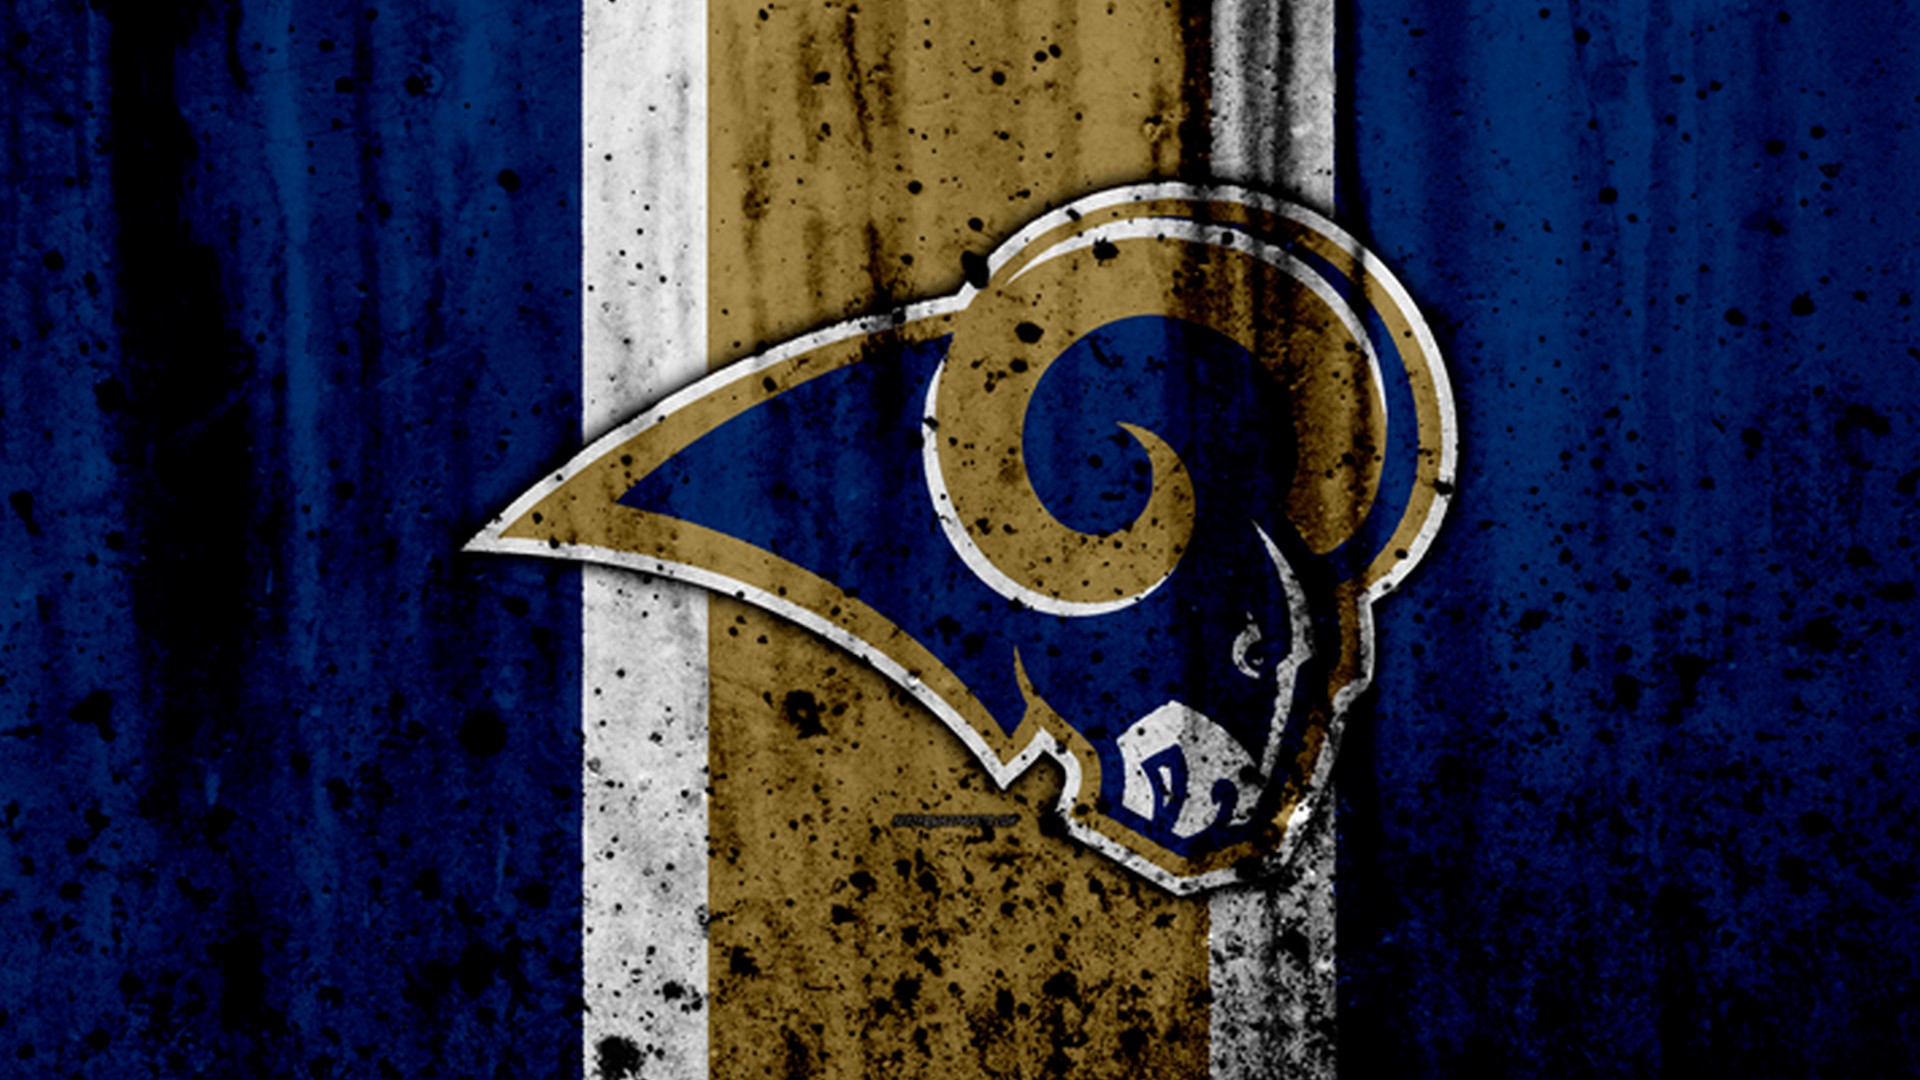 Backgrounds Los Angeles Rams HD With Resolution 1920X1080 pixel. You can make this wallpaper for your Mac or Windows Desktop Background, iPhone, Android or Tablet and another Smartphone device for free